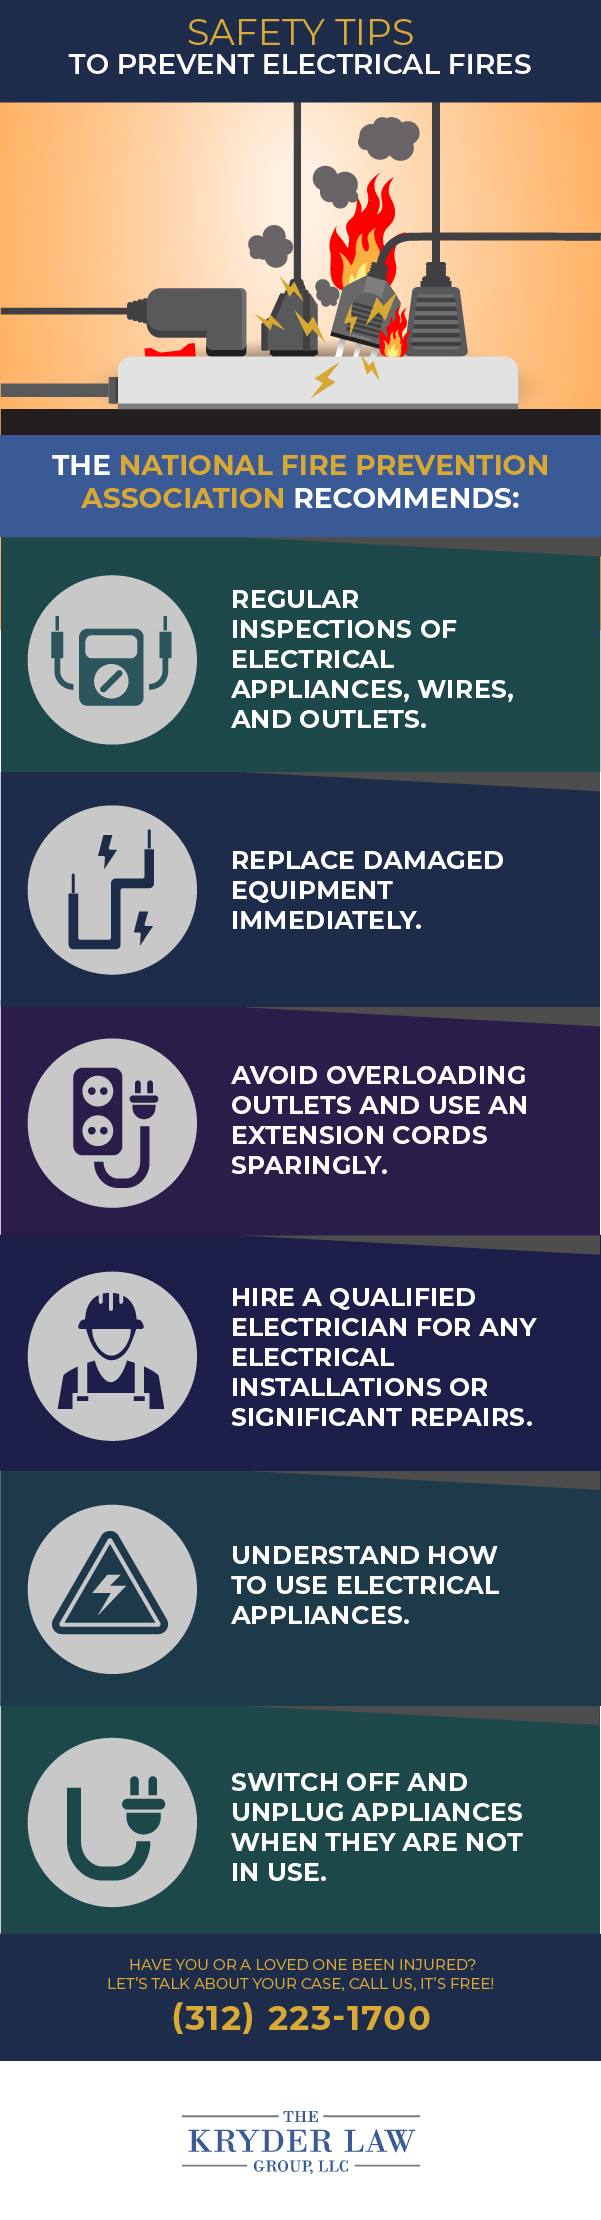 Safety Tips to Prevent Electrical Fires